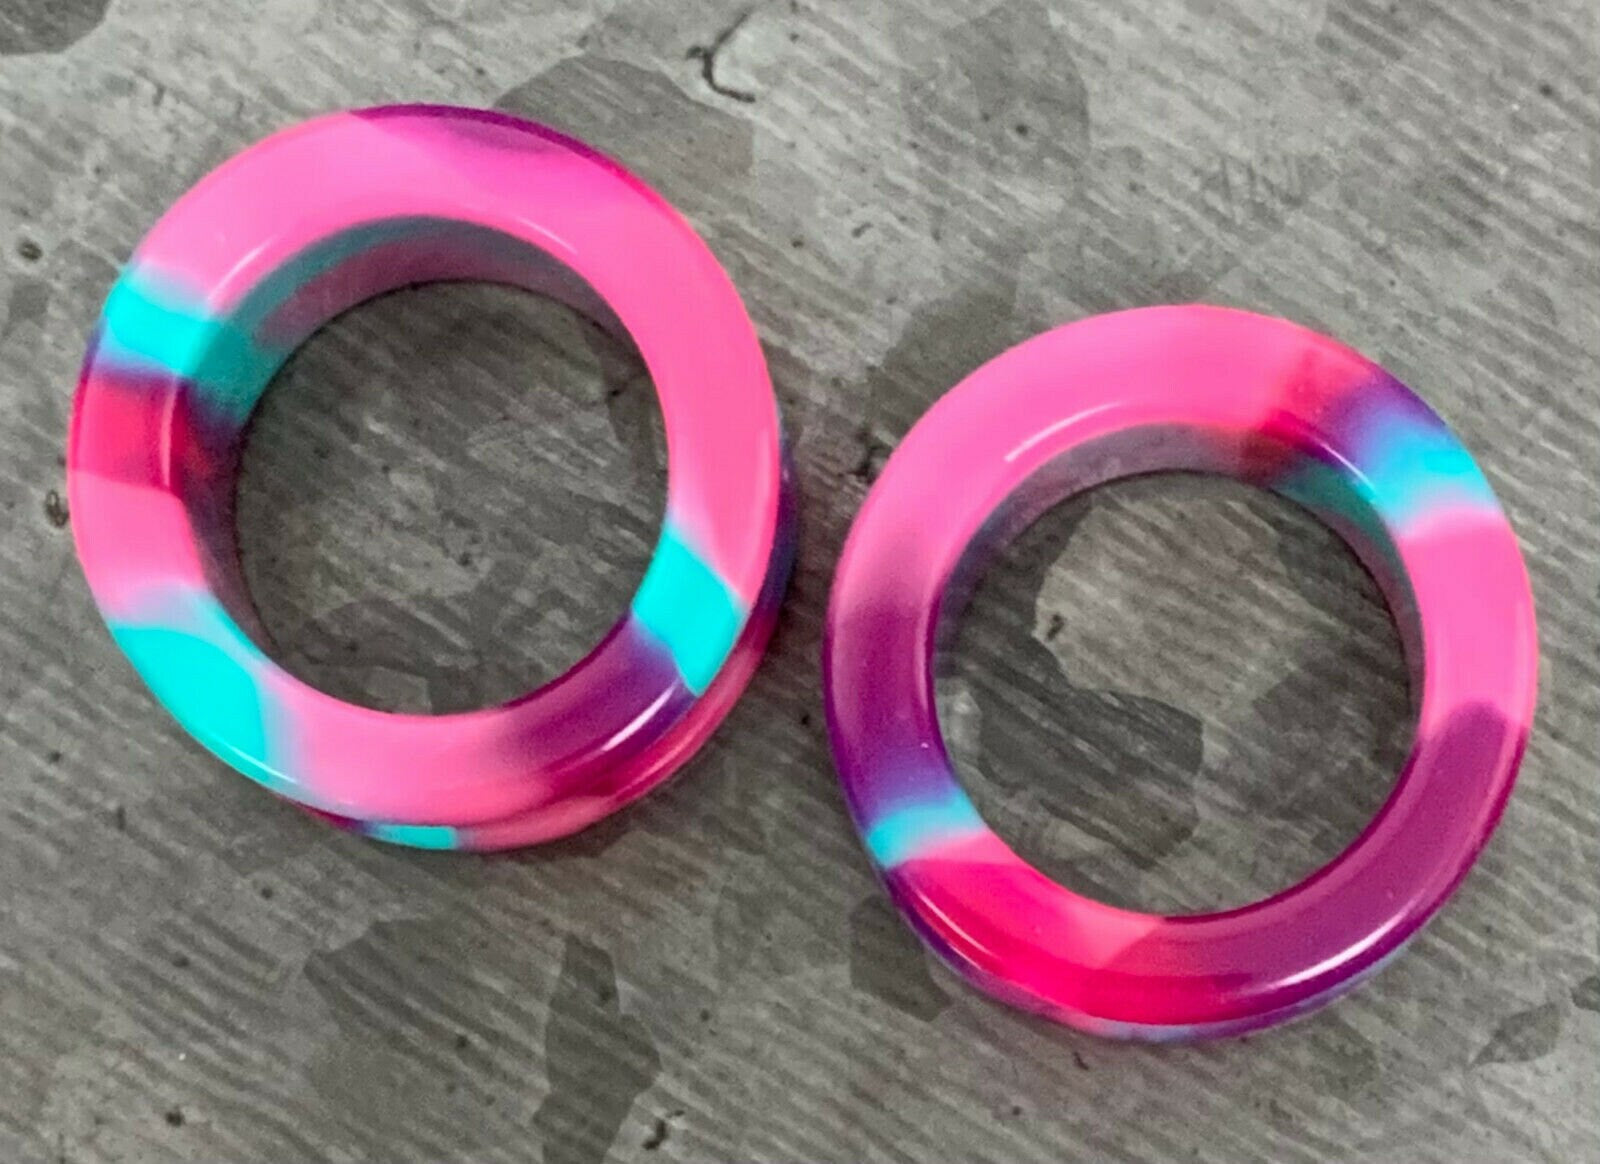 PAIR of Stunning Pink, Purple & Teal Swirl Galaxy Silicone Double Flare Tunnel/Plugs - Gauges 2g (6.5mm) up to 2" (50mm) available!